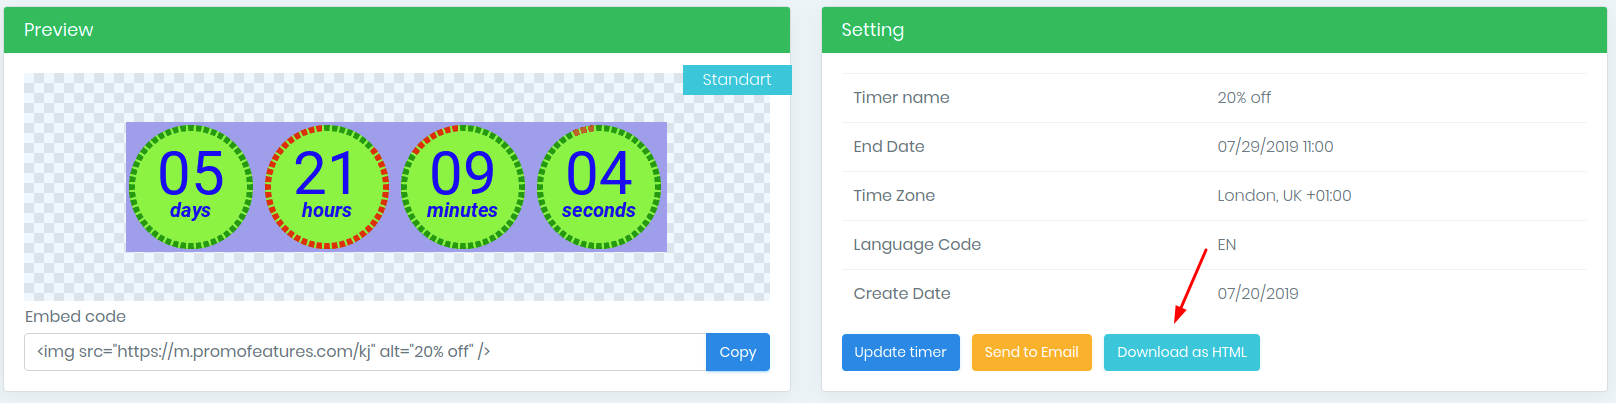 Download timer as Html